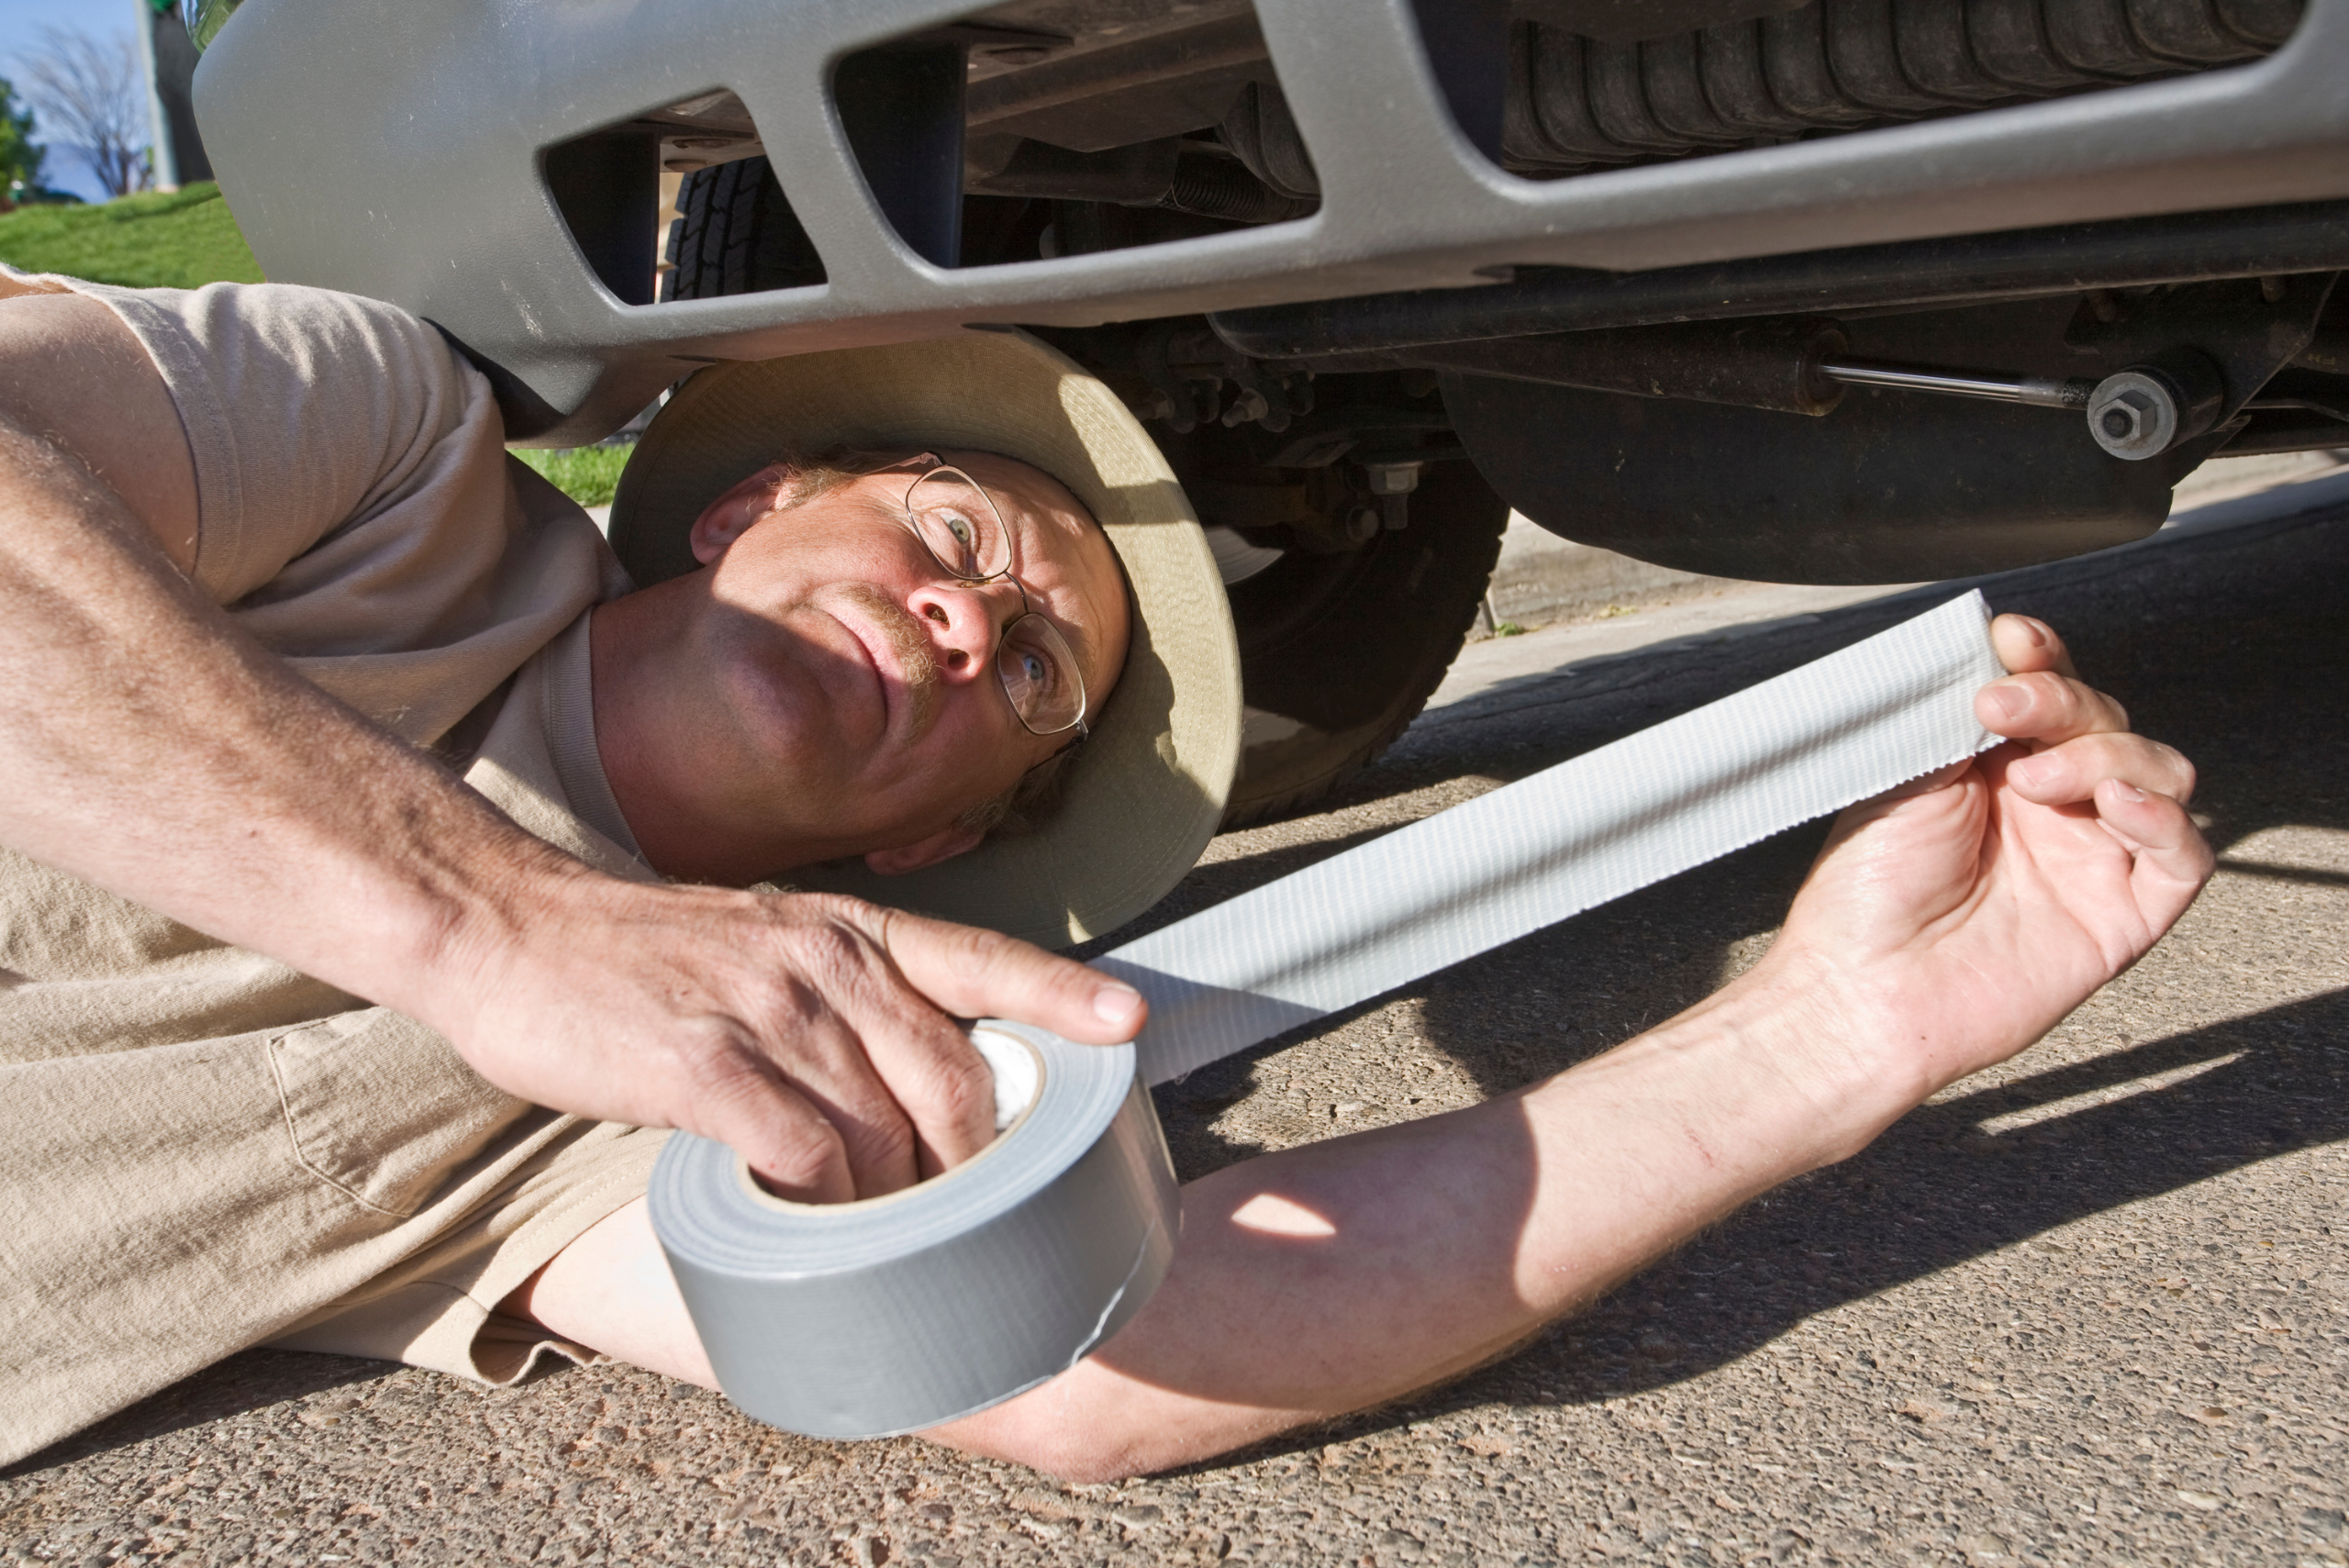 A man on the ground using duct tape to fix car bumper.